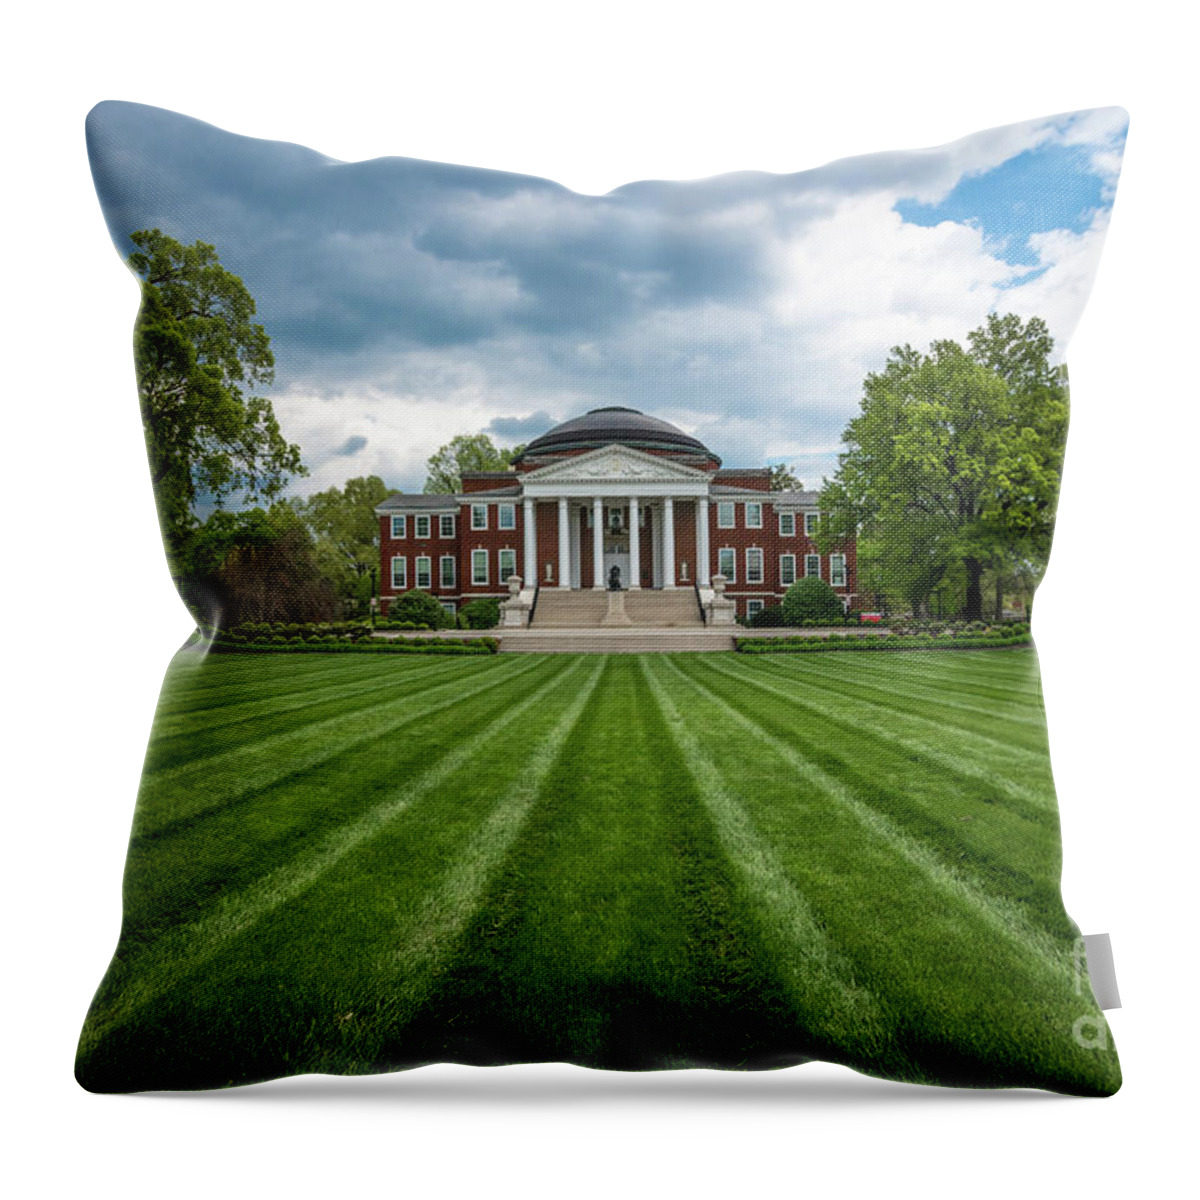 Grawemeyer Throw Pillow featuring the photograph Grawemeyer Hall - University of Louisville - Kentucky by Gary Whitton